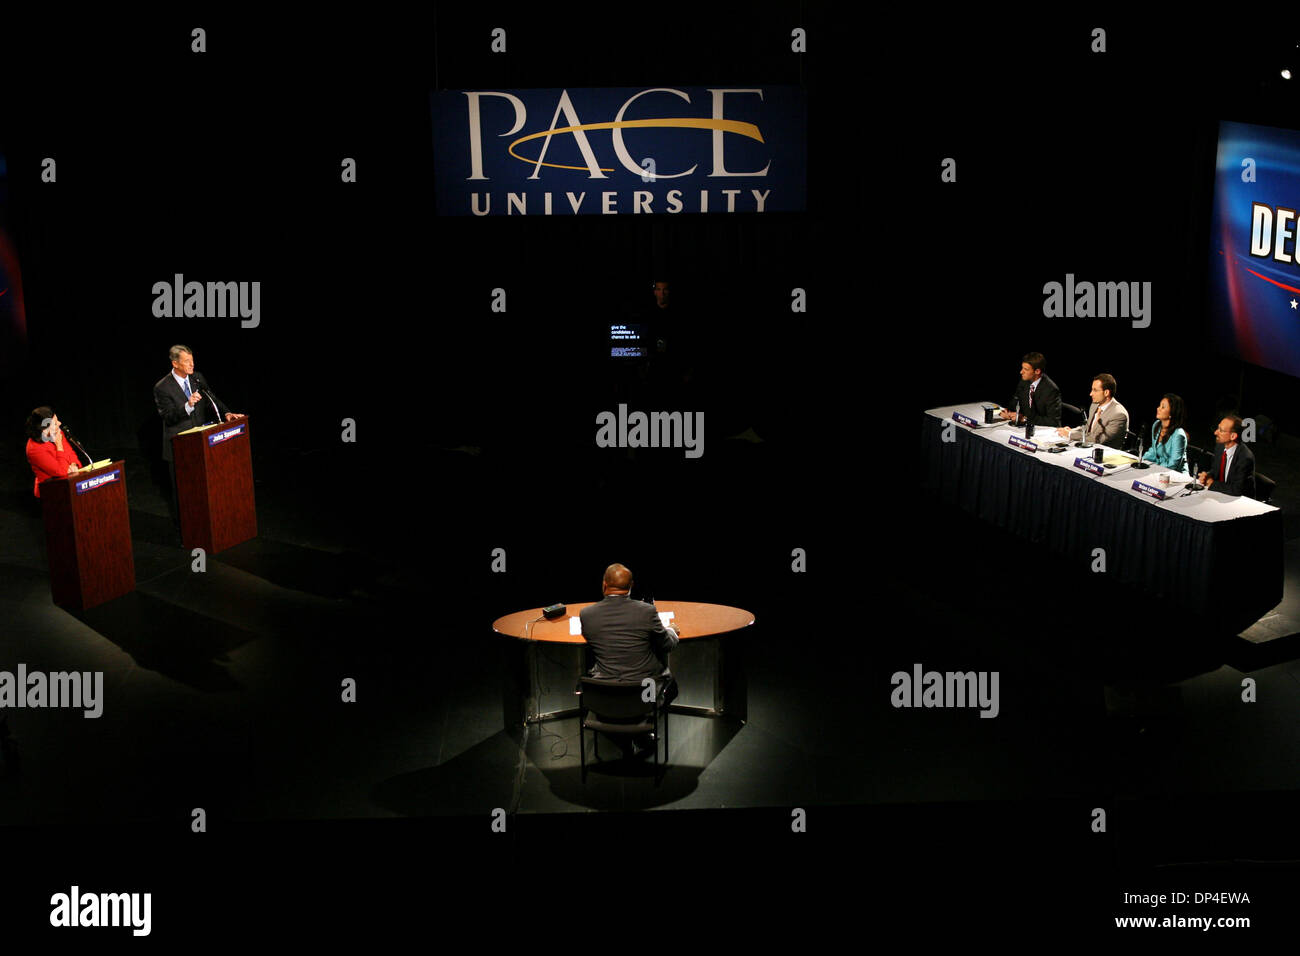 Aug 09, 2006; New York, New York, USA; Republican Senate candidates Kathleen Troia 'KT' Mcfarland and JOHN SPENCER face off during their second debate at the campus of Pace University in New York City on Wednesday. McFarland, a former Reagan-era Pentagon official (deputy assistant secretary of defense for public affairs) and Spencer, a former mayor of Yonkers, NY, are seeking to un Stock Photo